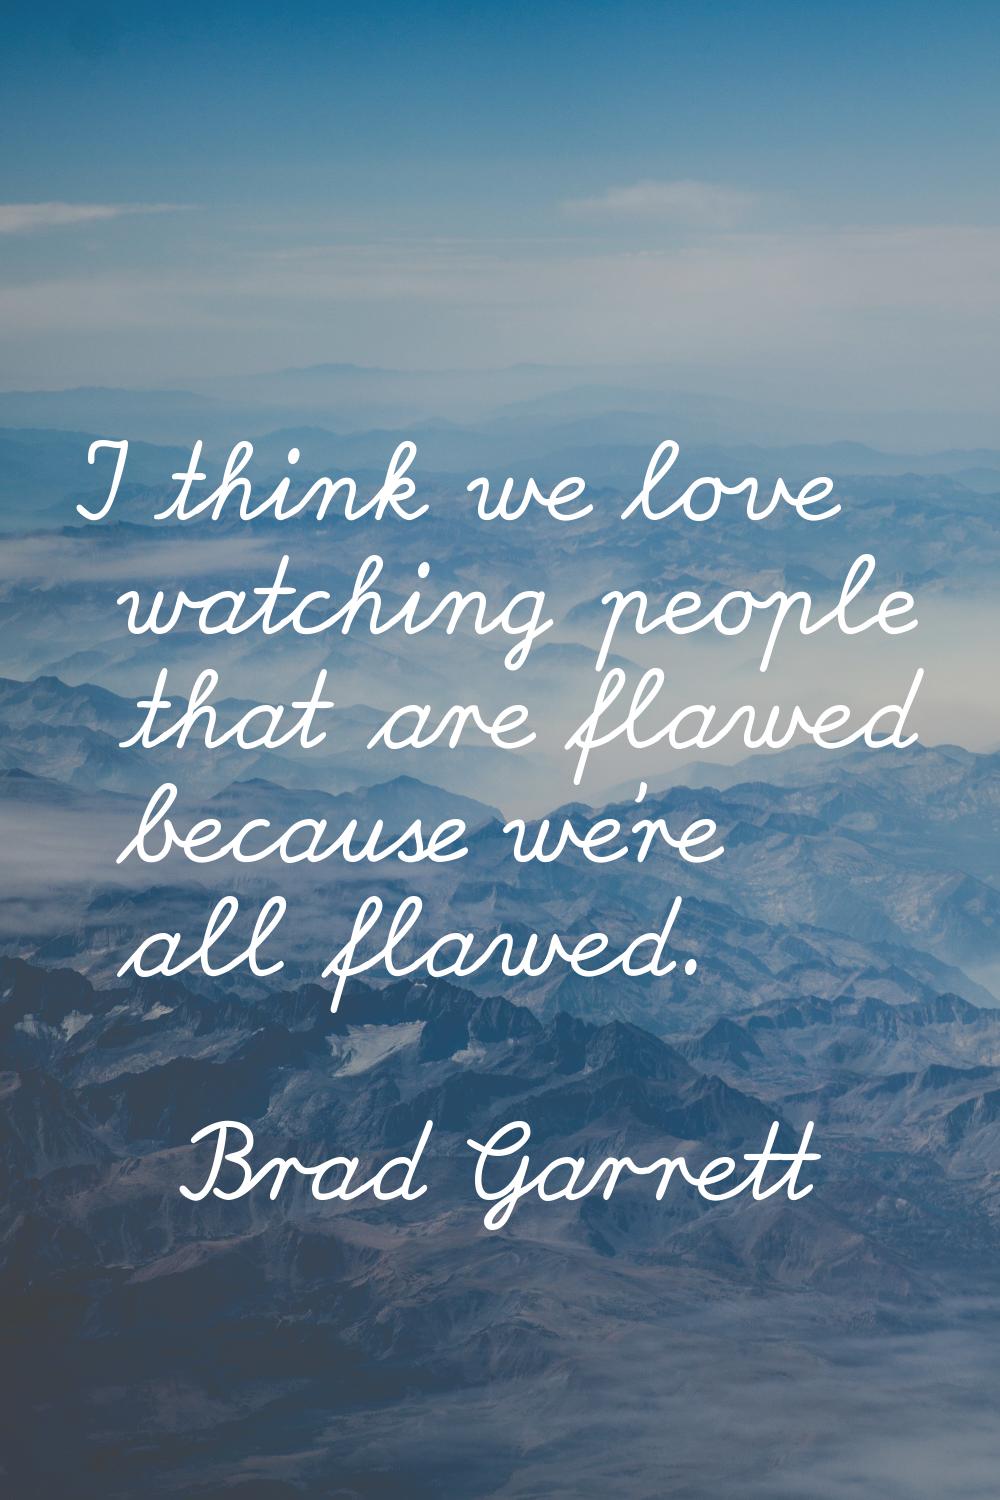 I think we love watching people that are flawed because we're all flawed.